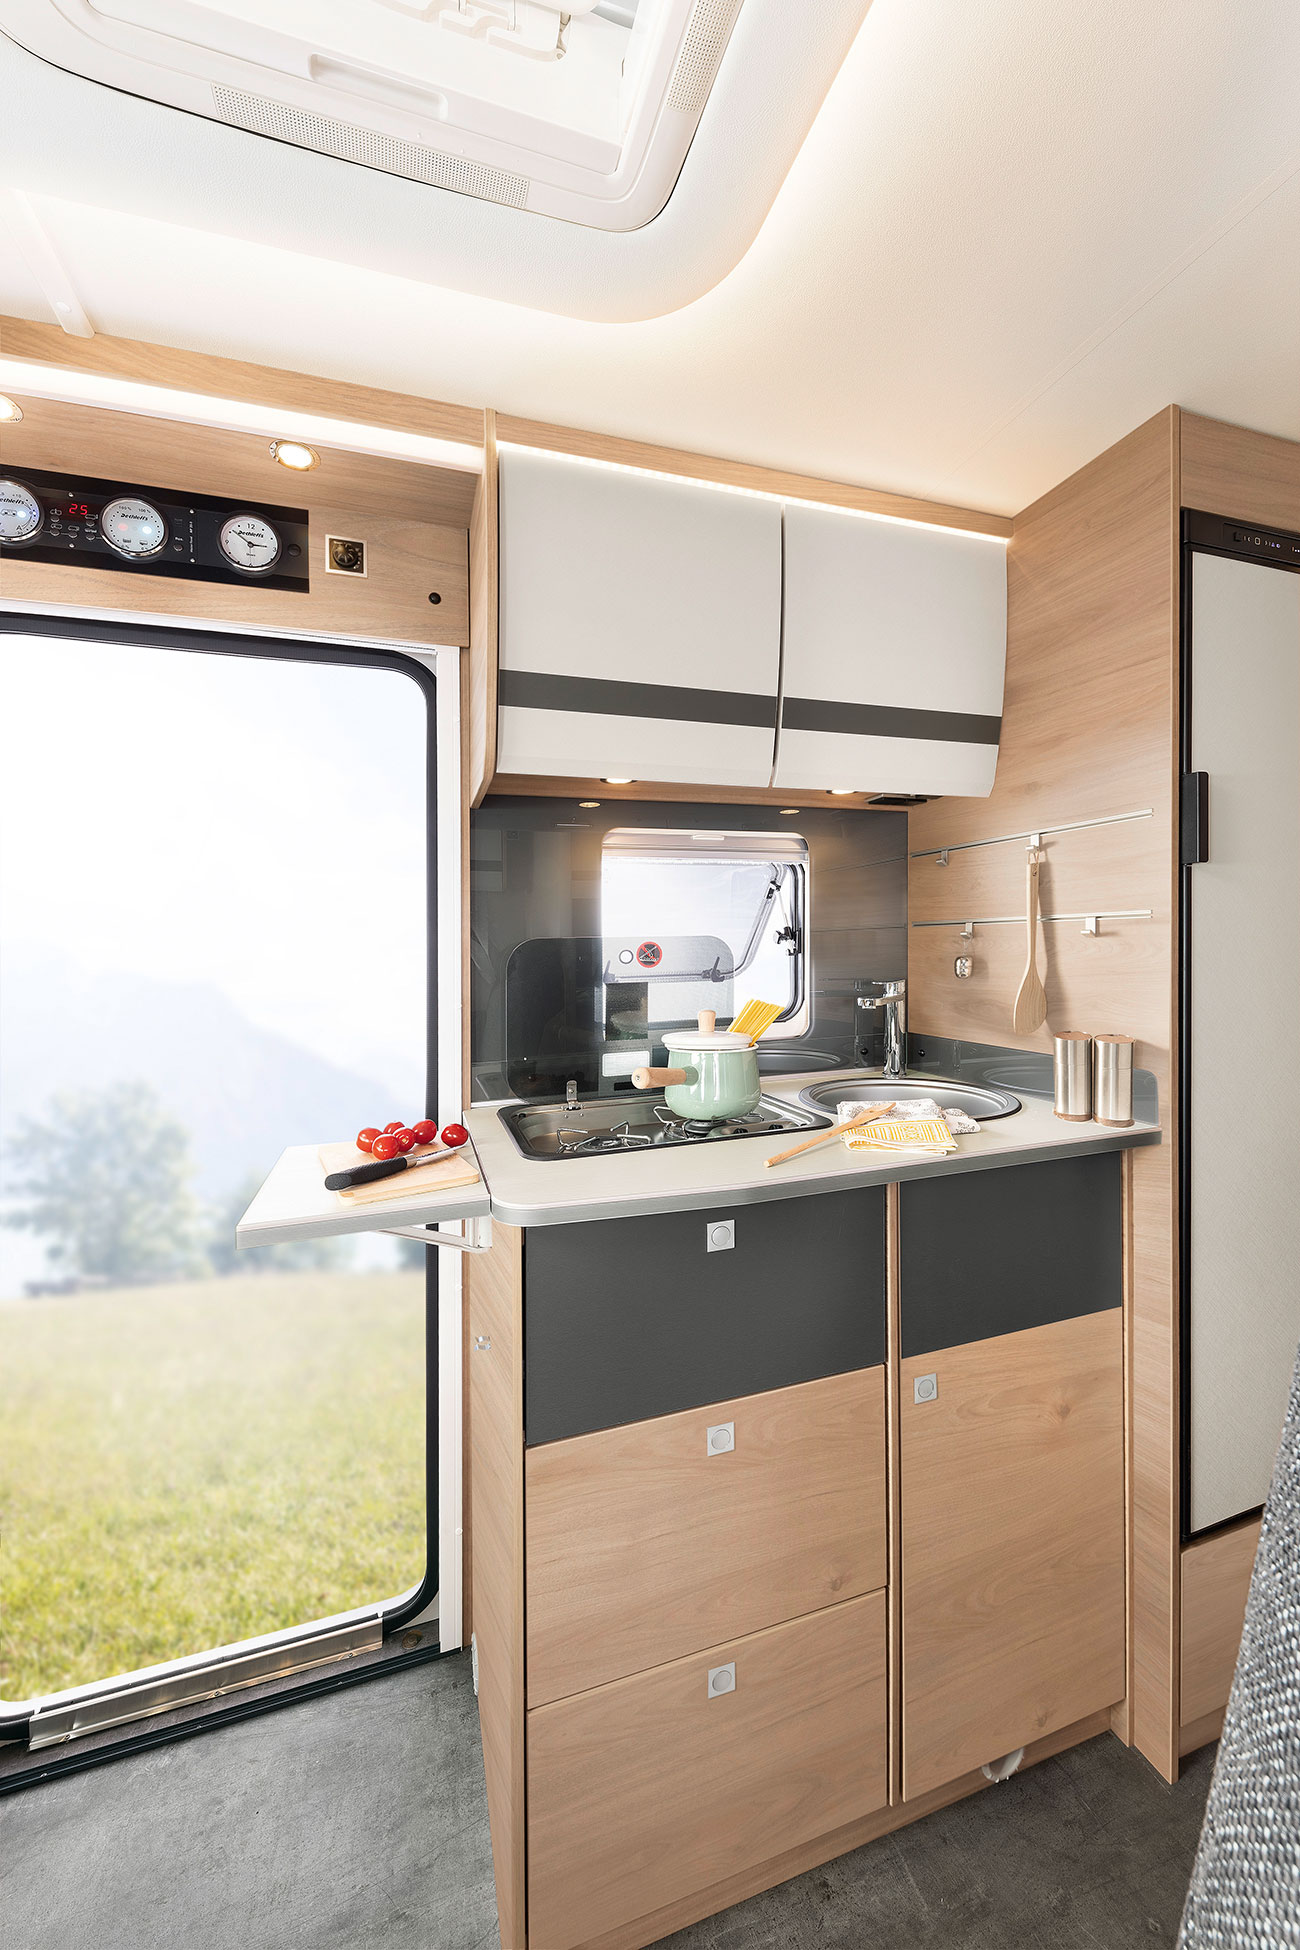 Compact, yet packed everything you need – fully equipped kitchen with hot-water system, gas cooker, large drawers and fridge • I 6